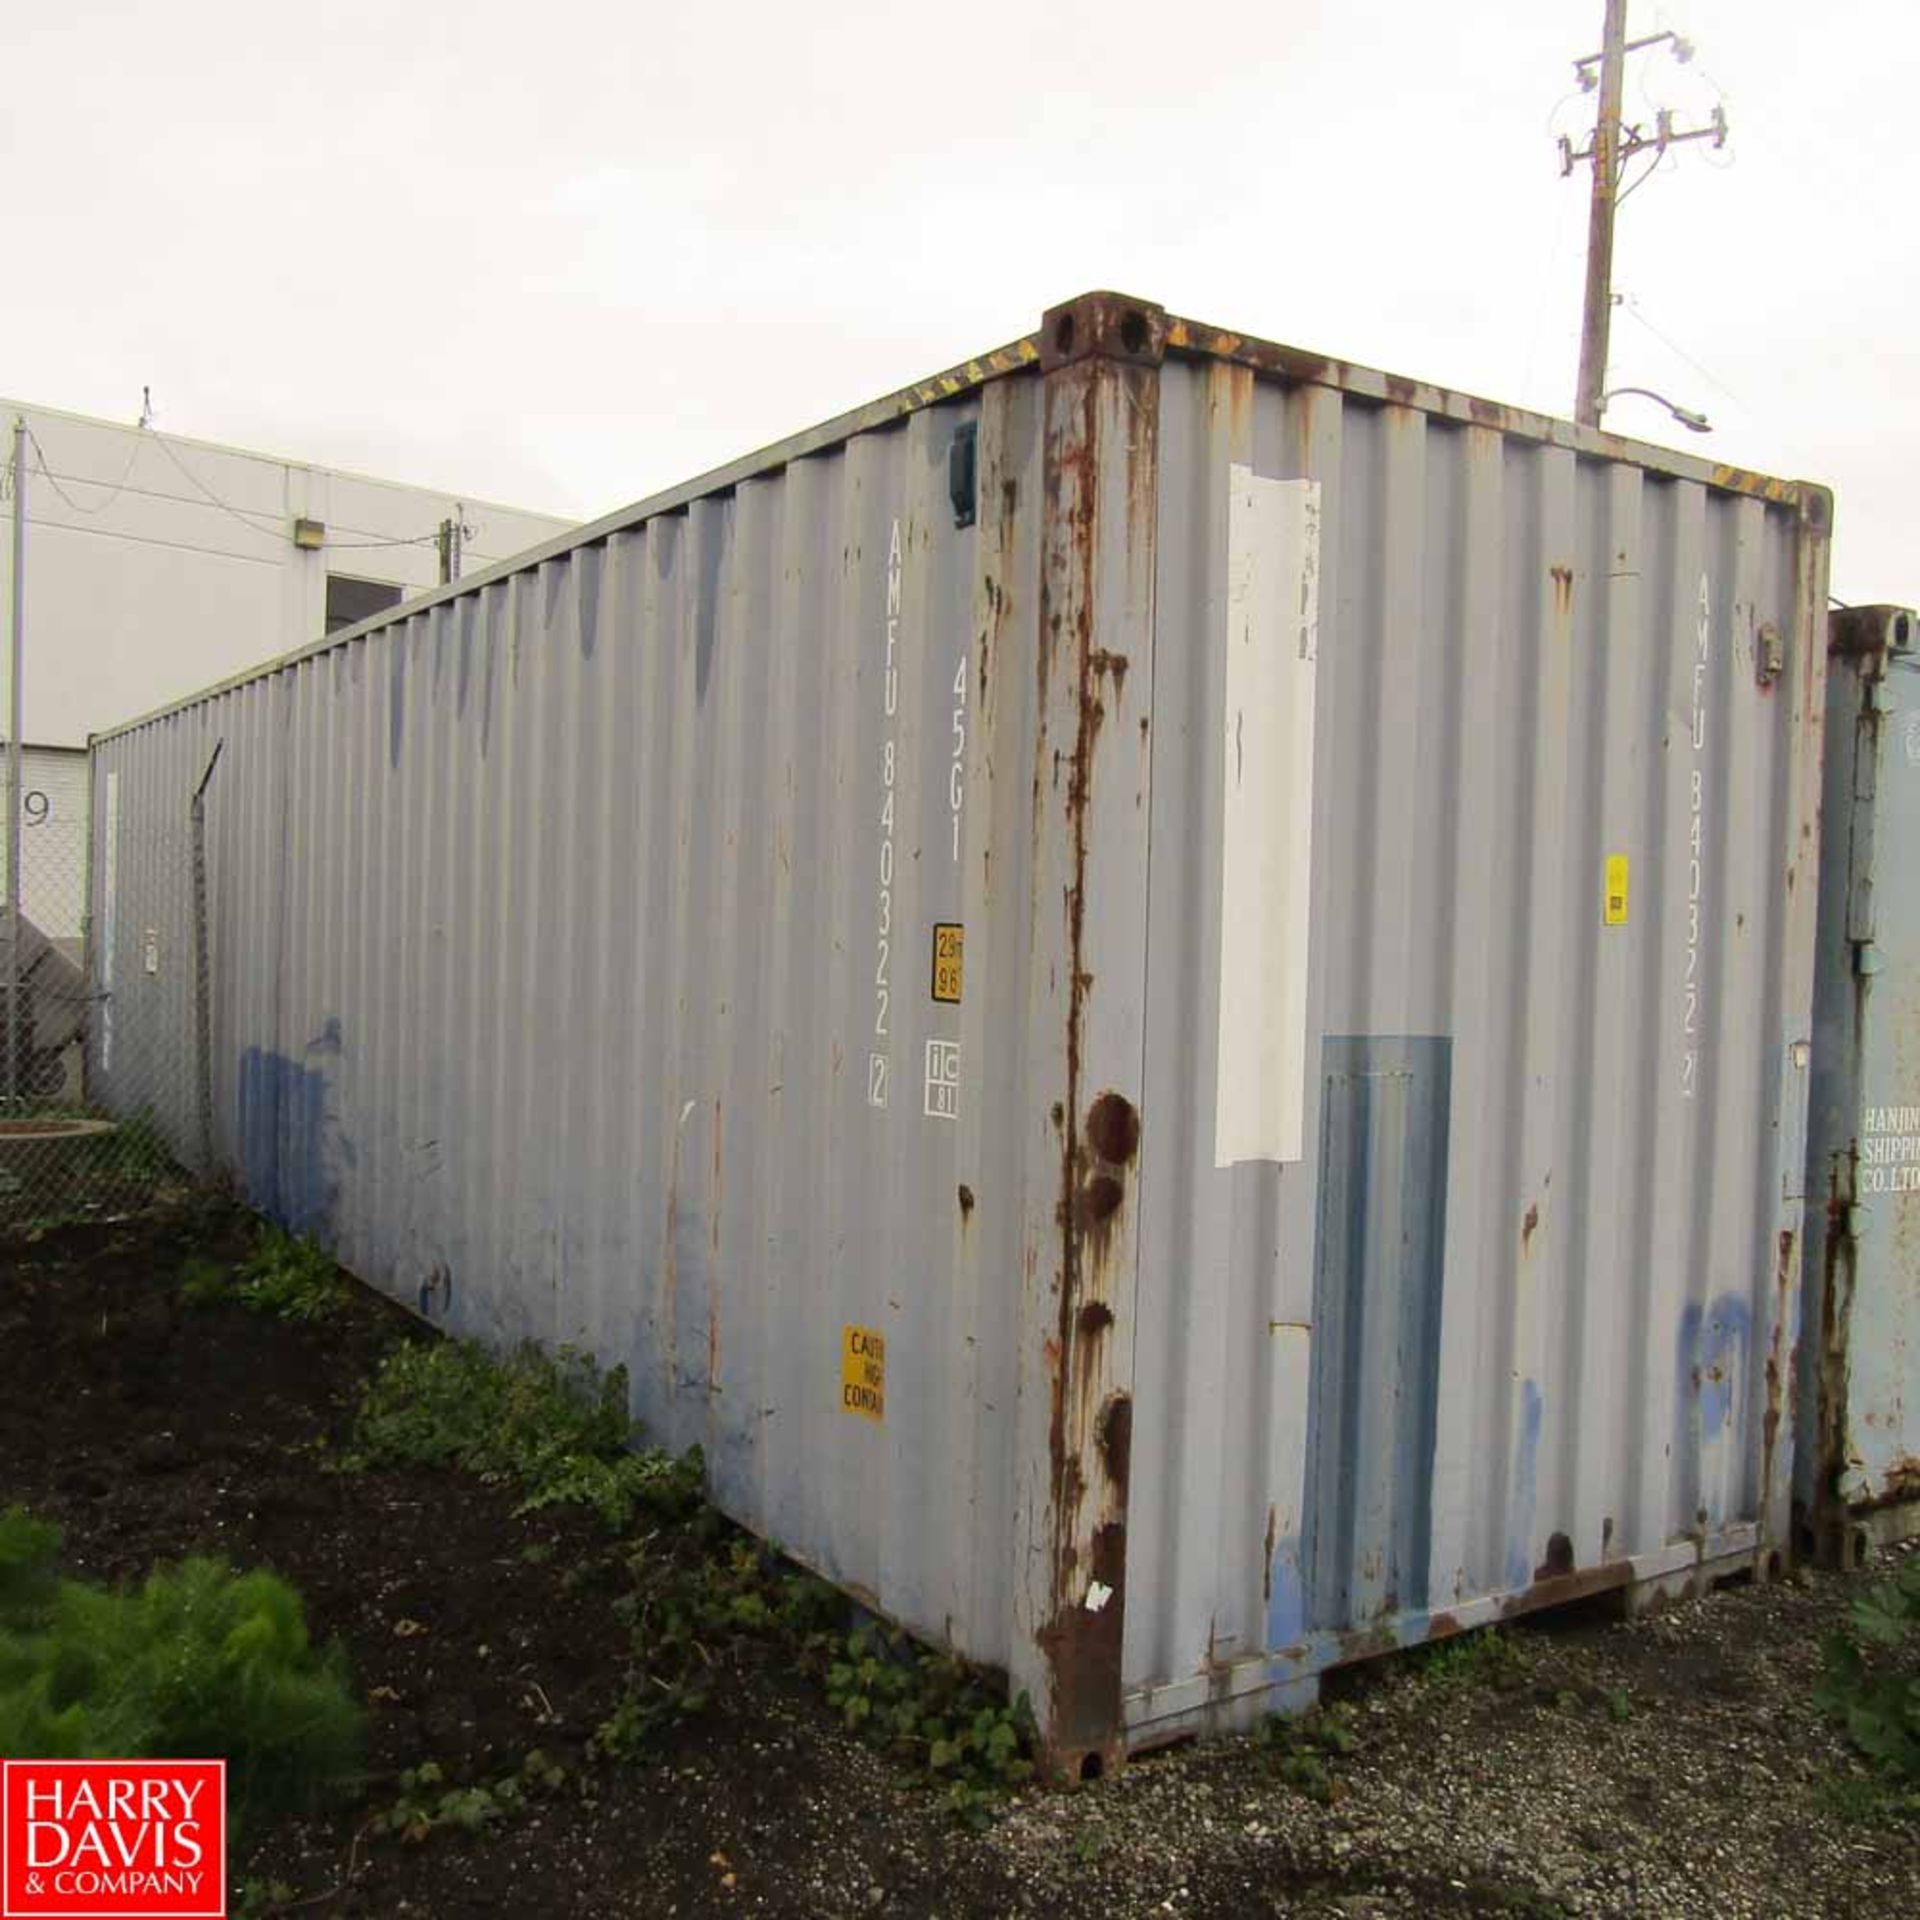 40' Shipping Container with Contents Including: Shelving Units, Metal Piping, Ladders, Scales